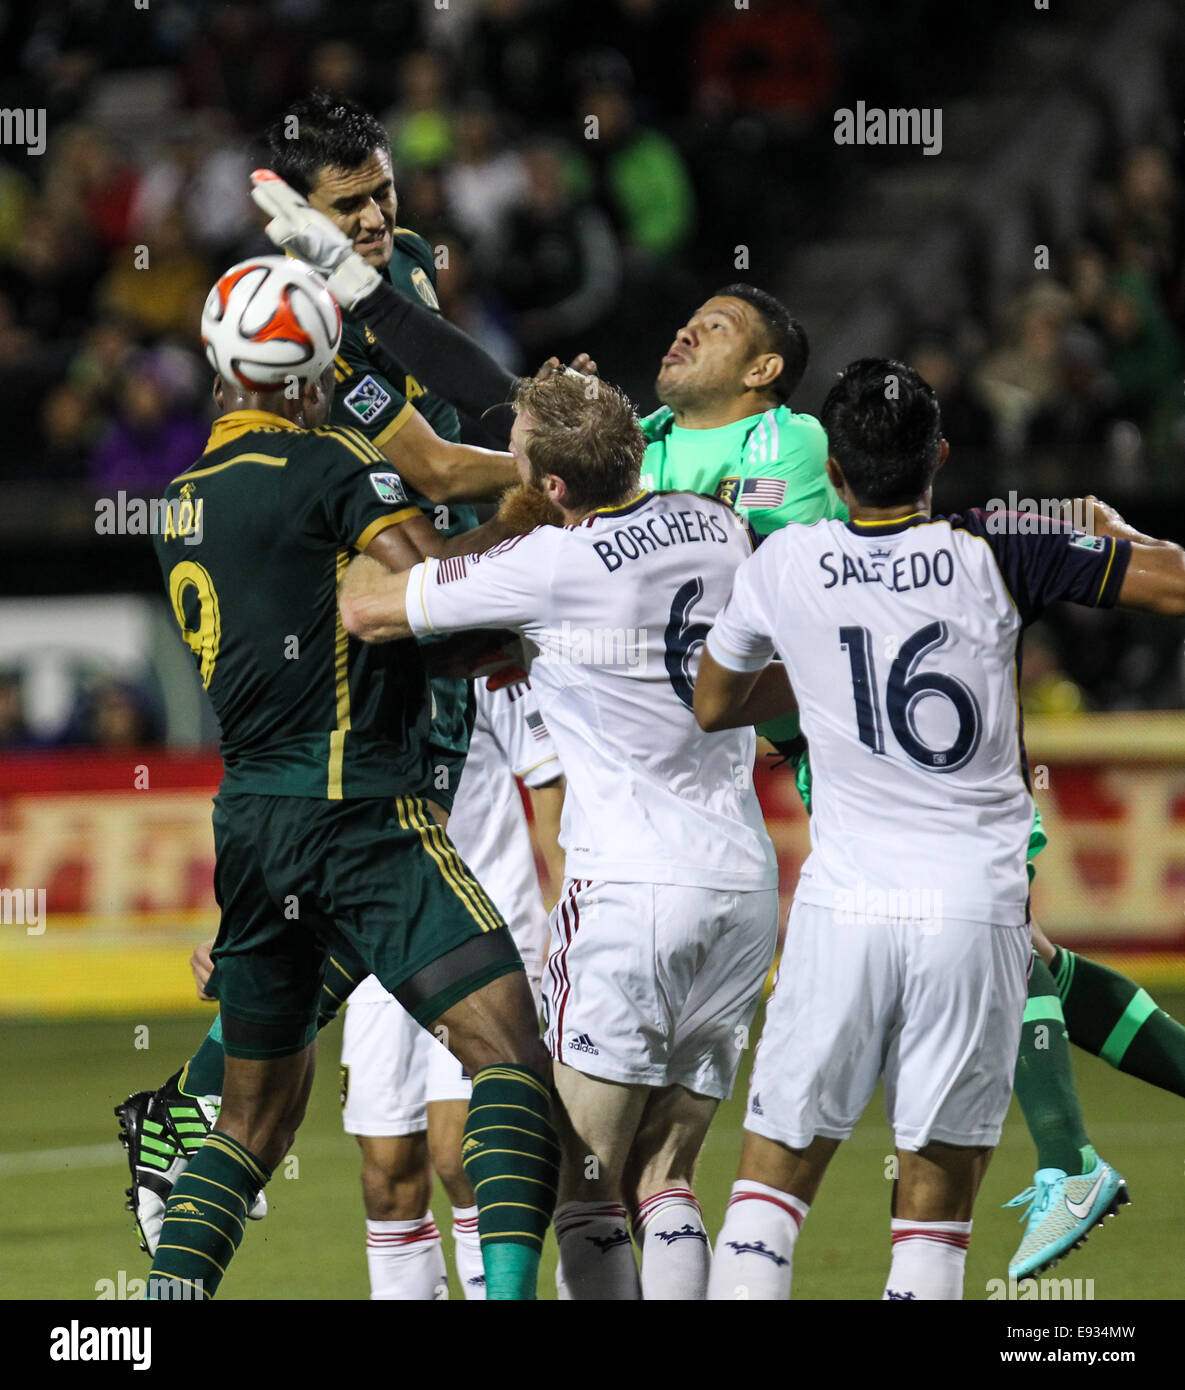 Portland, Oregon, USA. 17th October, 2014. Salt Lake keeper NICK RIMANDO (18) punches the ball away in the box. The Portland Timbers play the Real Salt Lake at Providence Park on October 17, 2014. Credit:  David Blair/ZUMA Wire/Alamy Live News Stock Photo